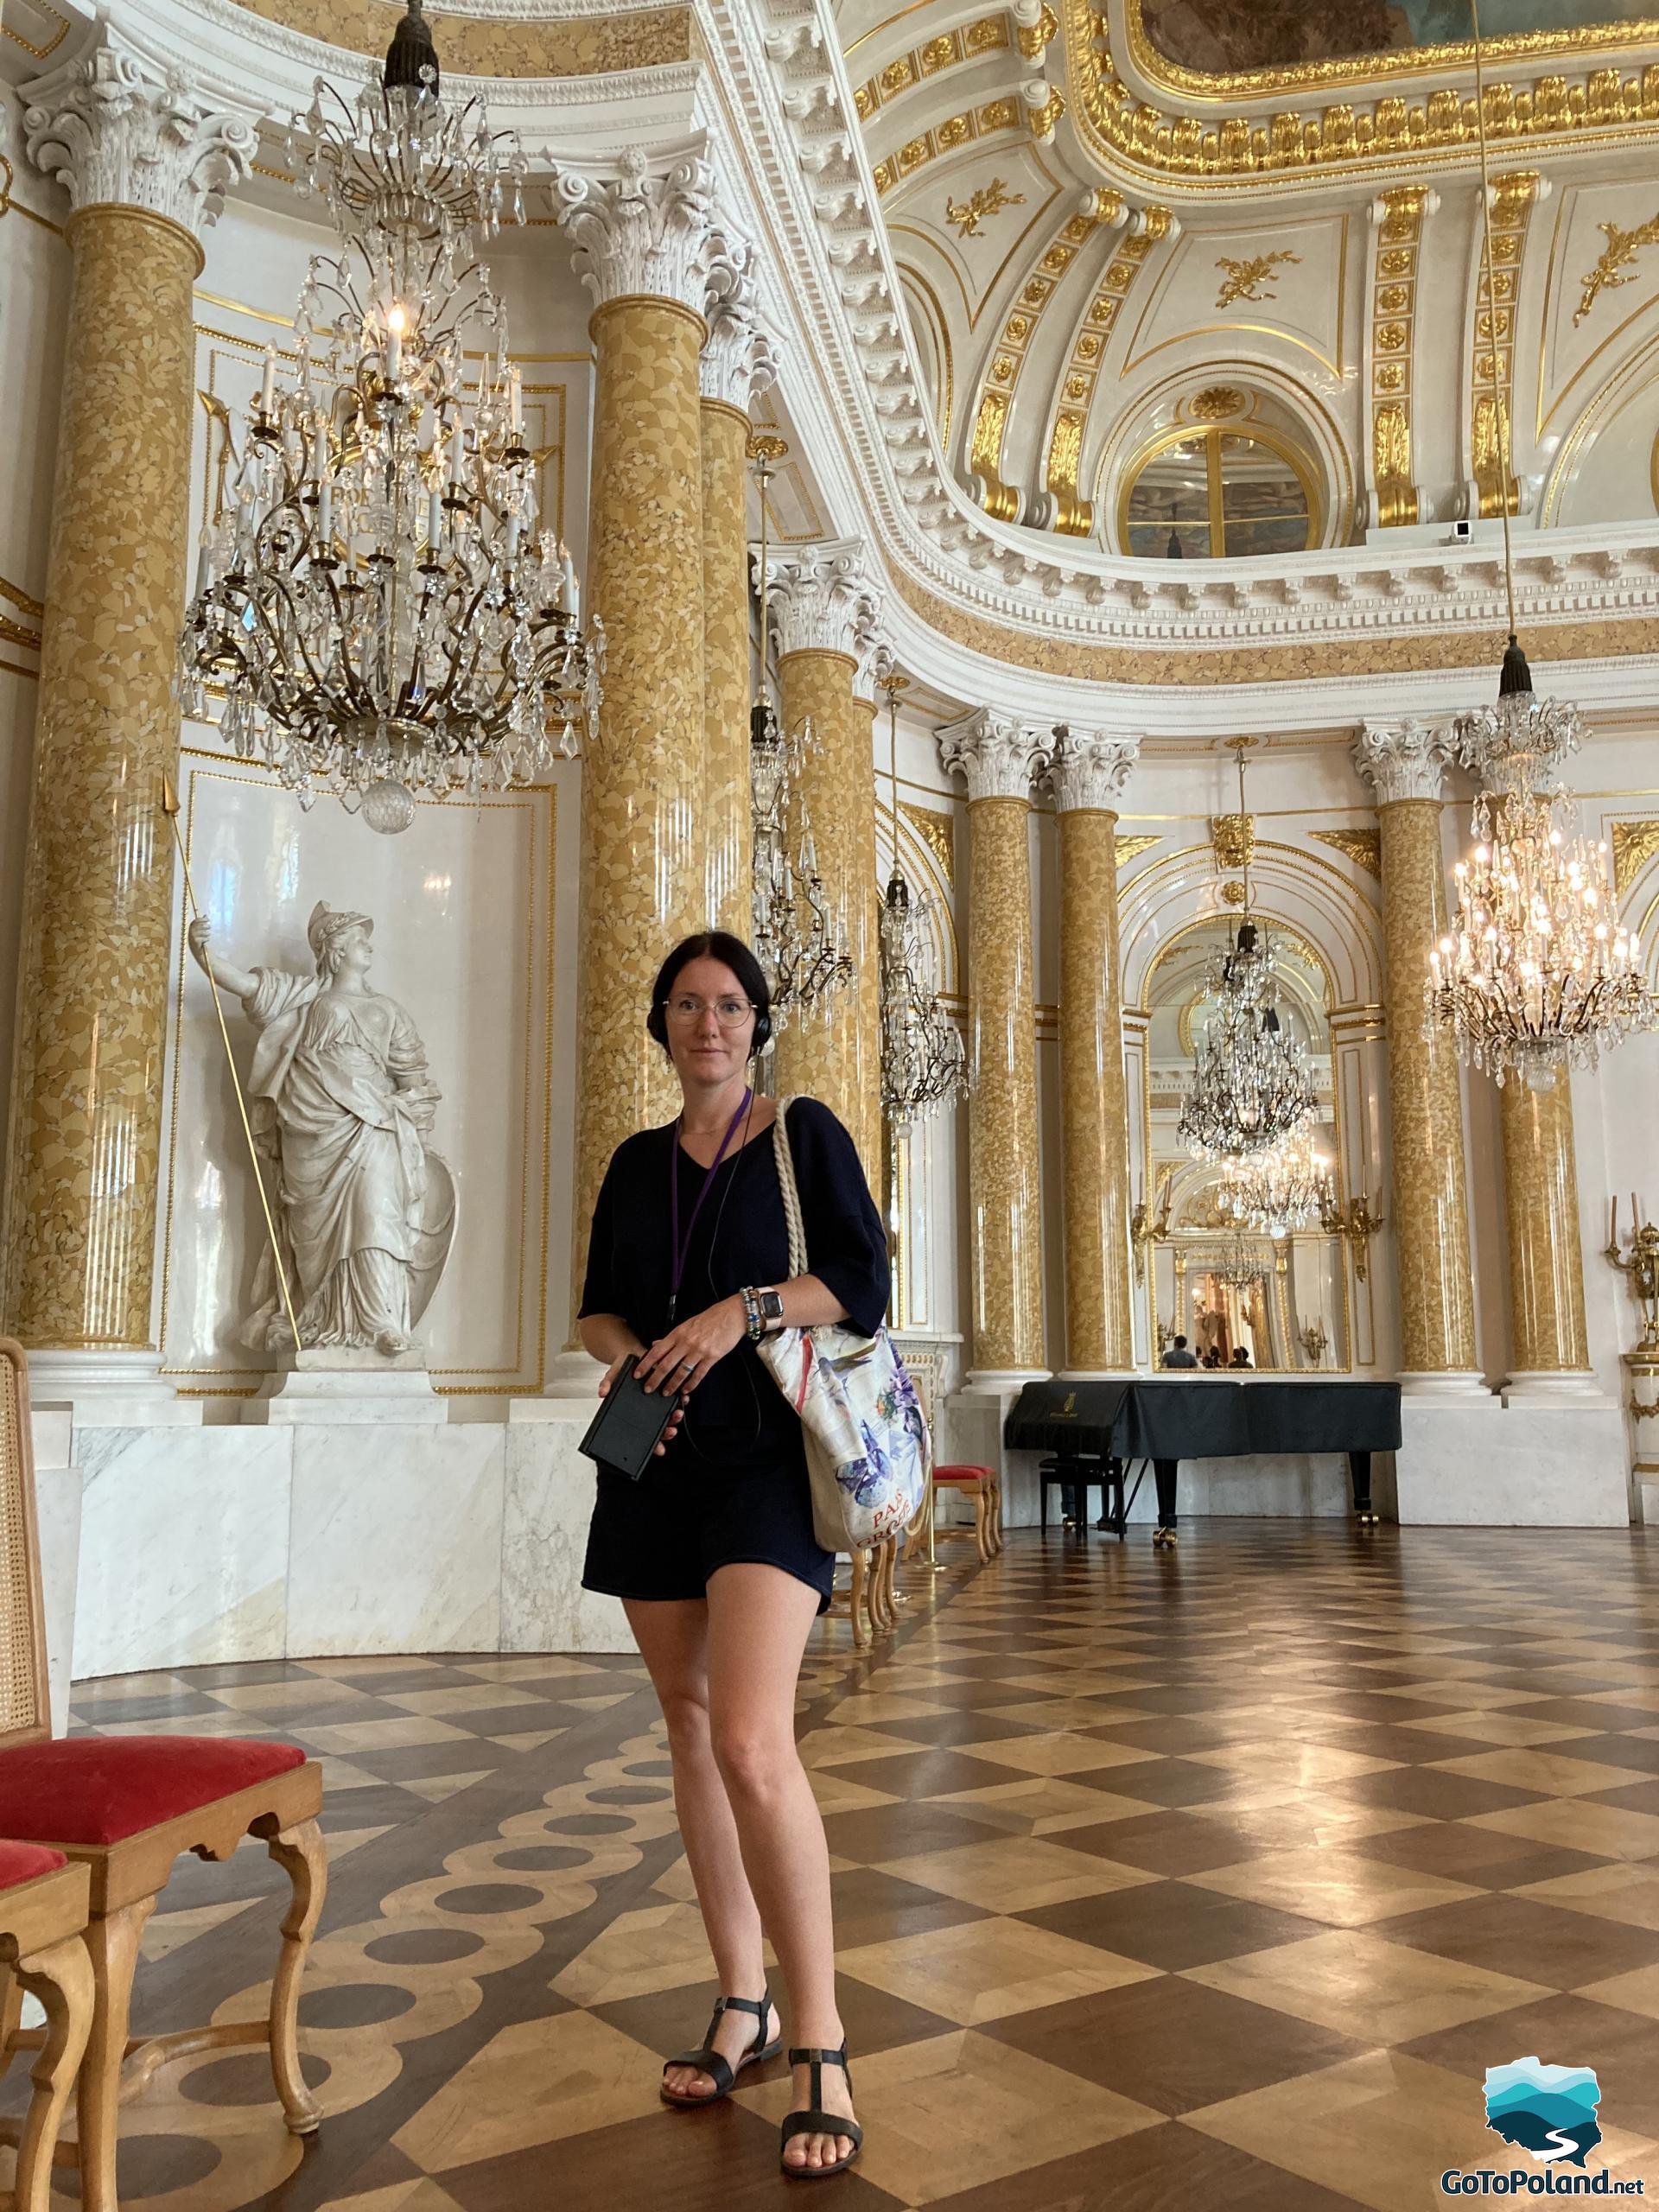 a woman is standing in the ballroom, behind her a black piano, you can see a fragment of a painted ceiling, the decoration of the room is Roman columns and crystal chandeliers and a sculpture